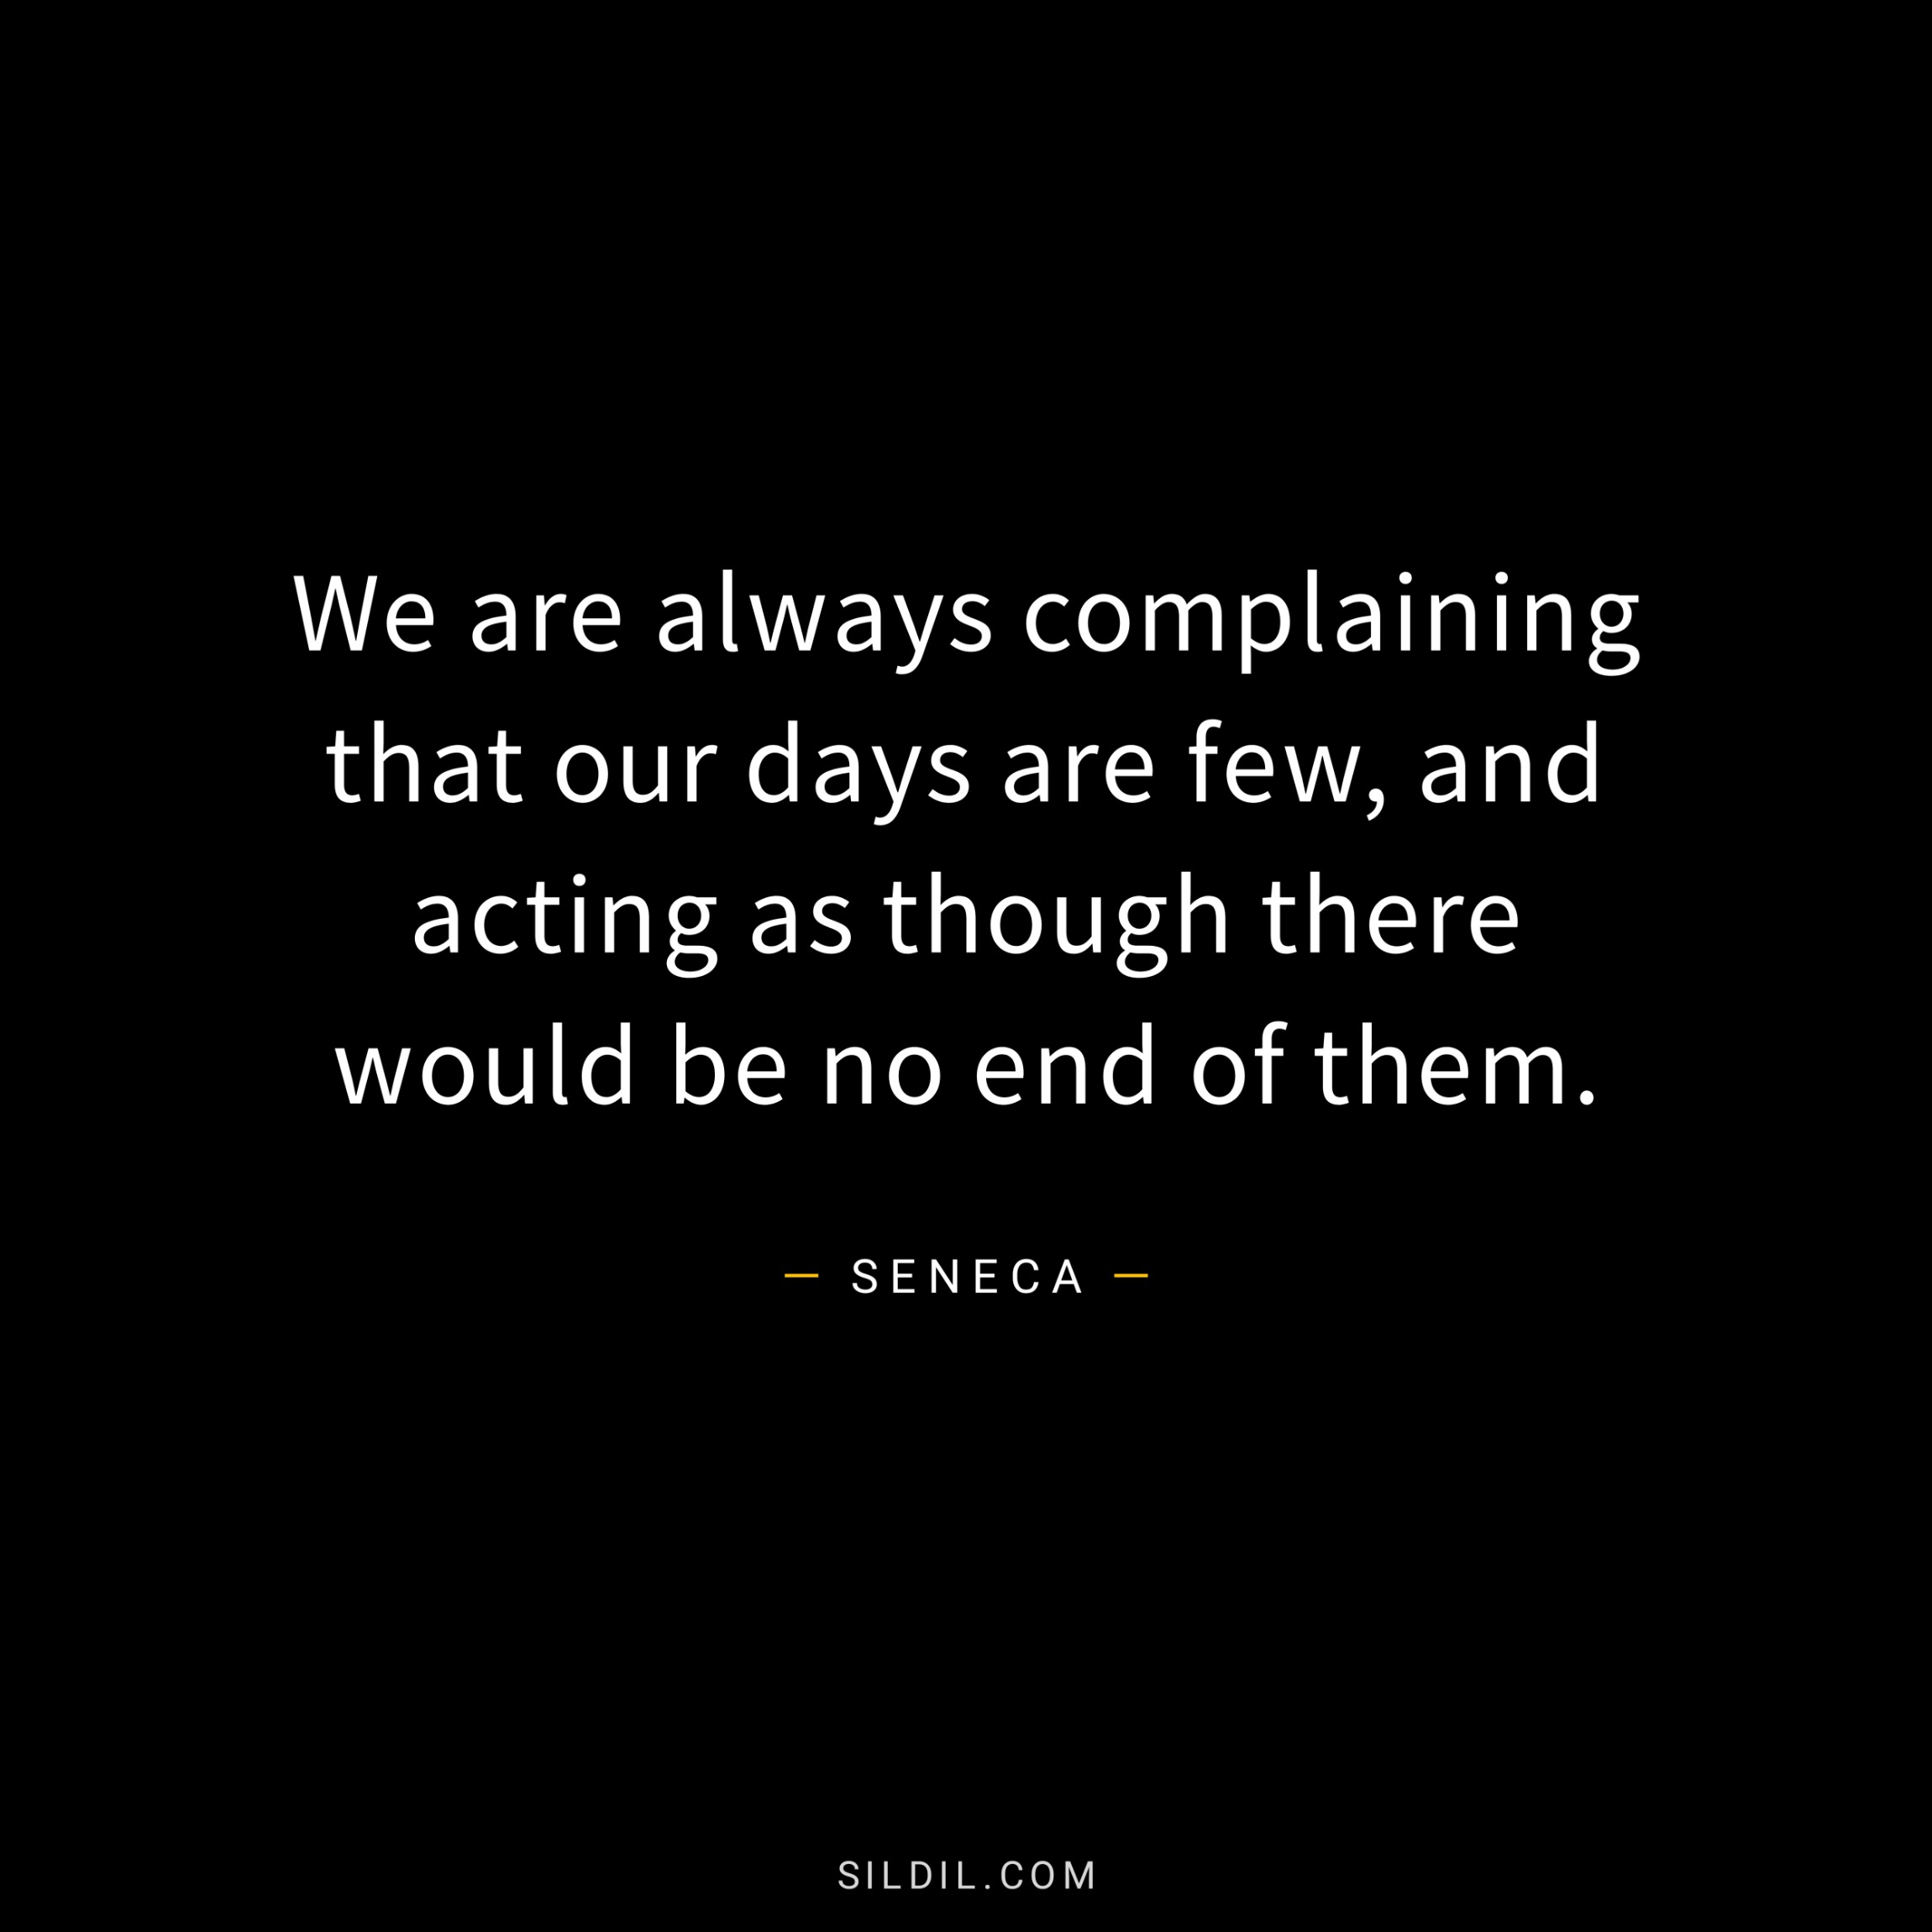 We are always complaining that our days are few, and acting as though there would be no end of them.